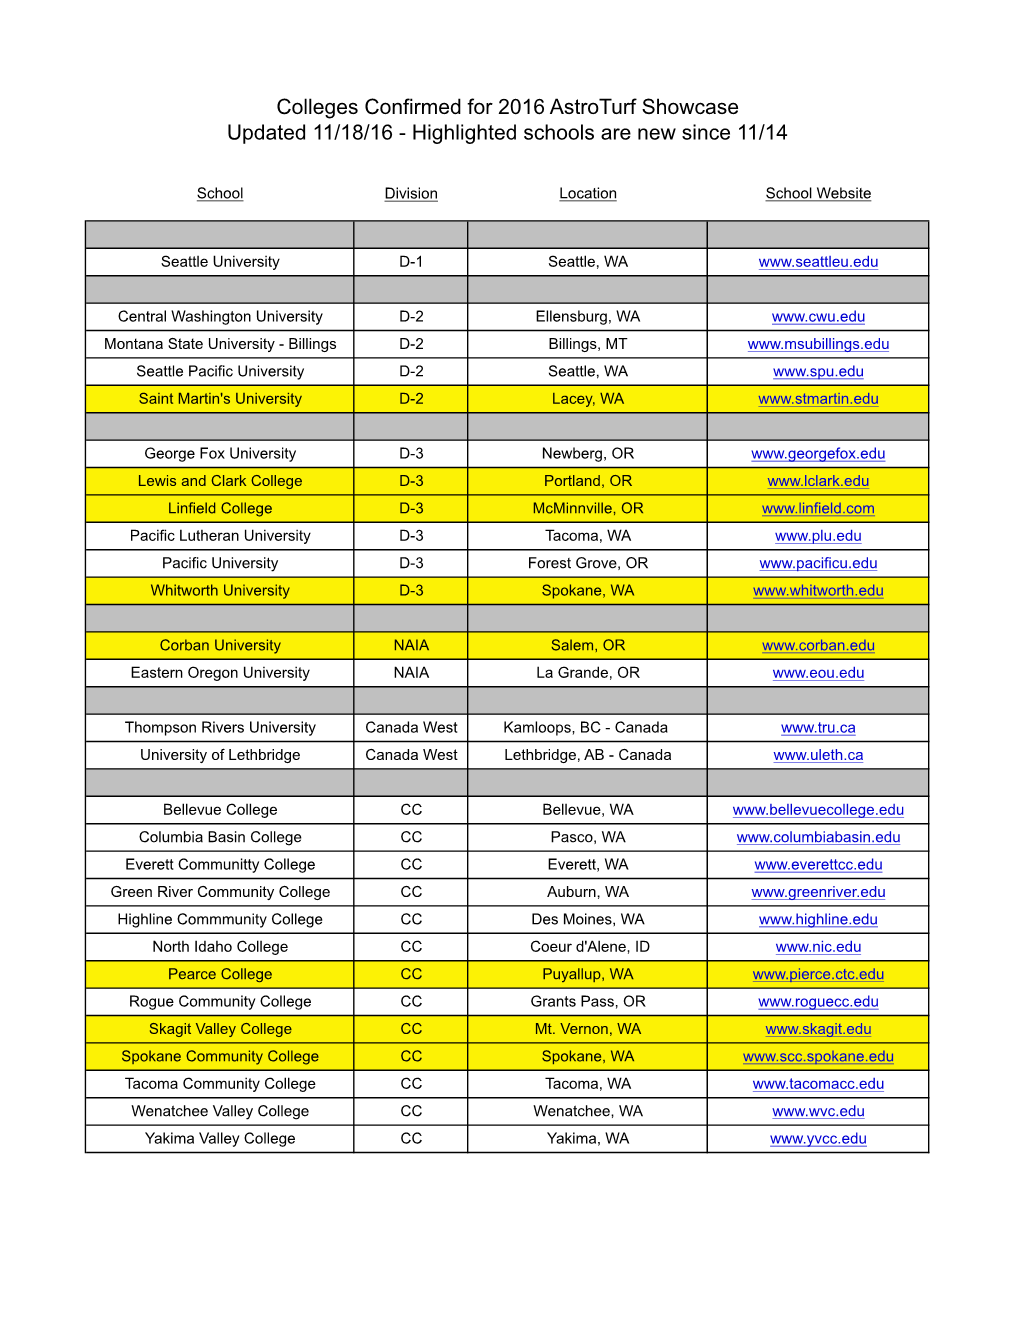 Colleges Confirmed for 2016 Astroturf Showcase Updated 11/18/16 - Highlighted Schools Are New Since 11/14